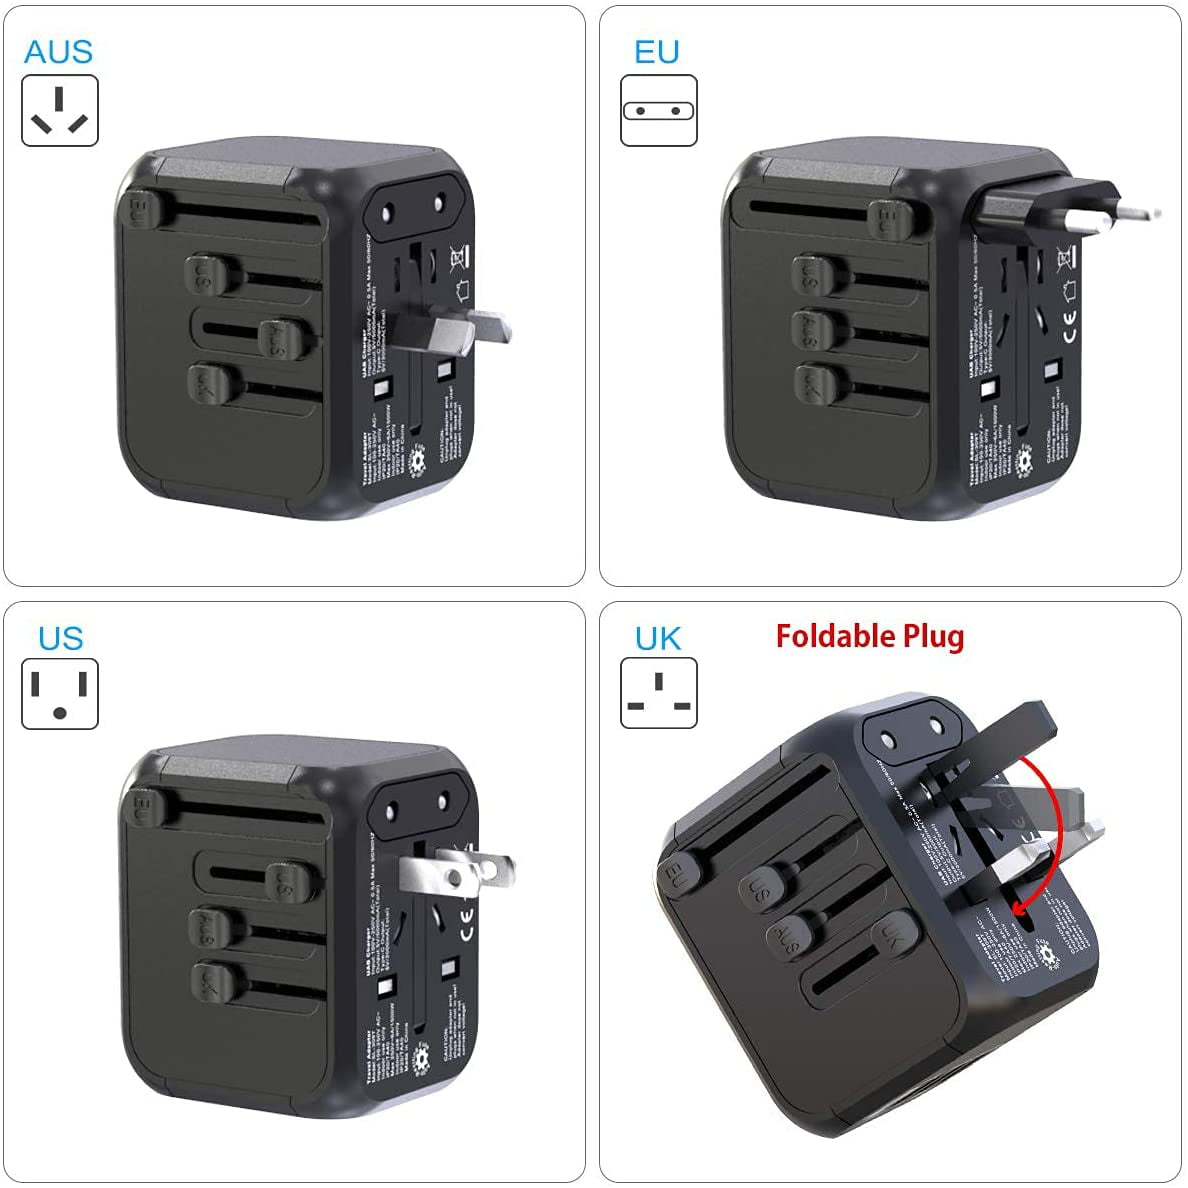 UK Cover 200 Countries Fast Wall Charging Travel Accessories for EU Travel Power Adapter International Travel Adapter with Auto Resetting Fuse 3 USB and 1 Type-C Universal Travel Adapter US